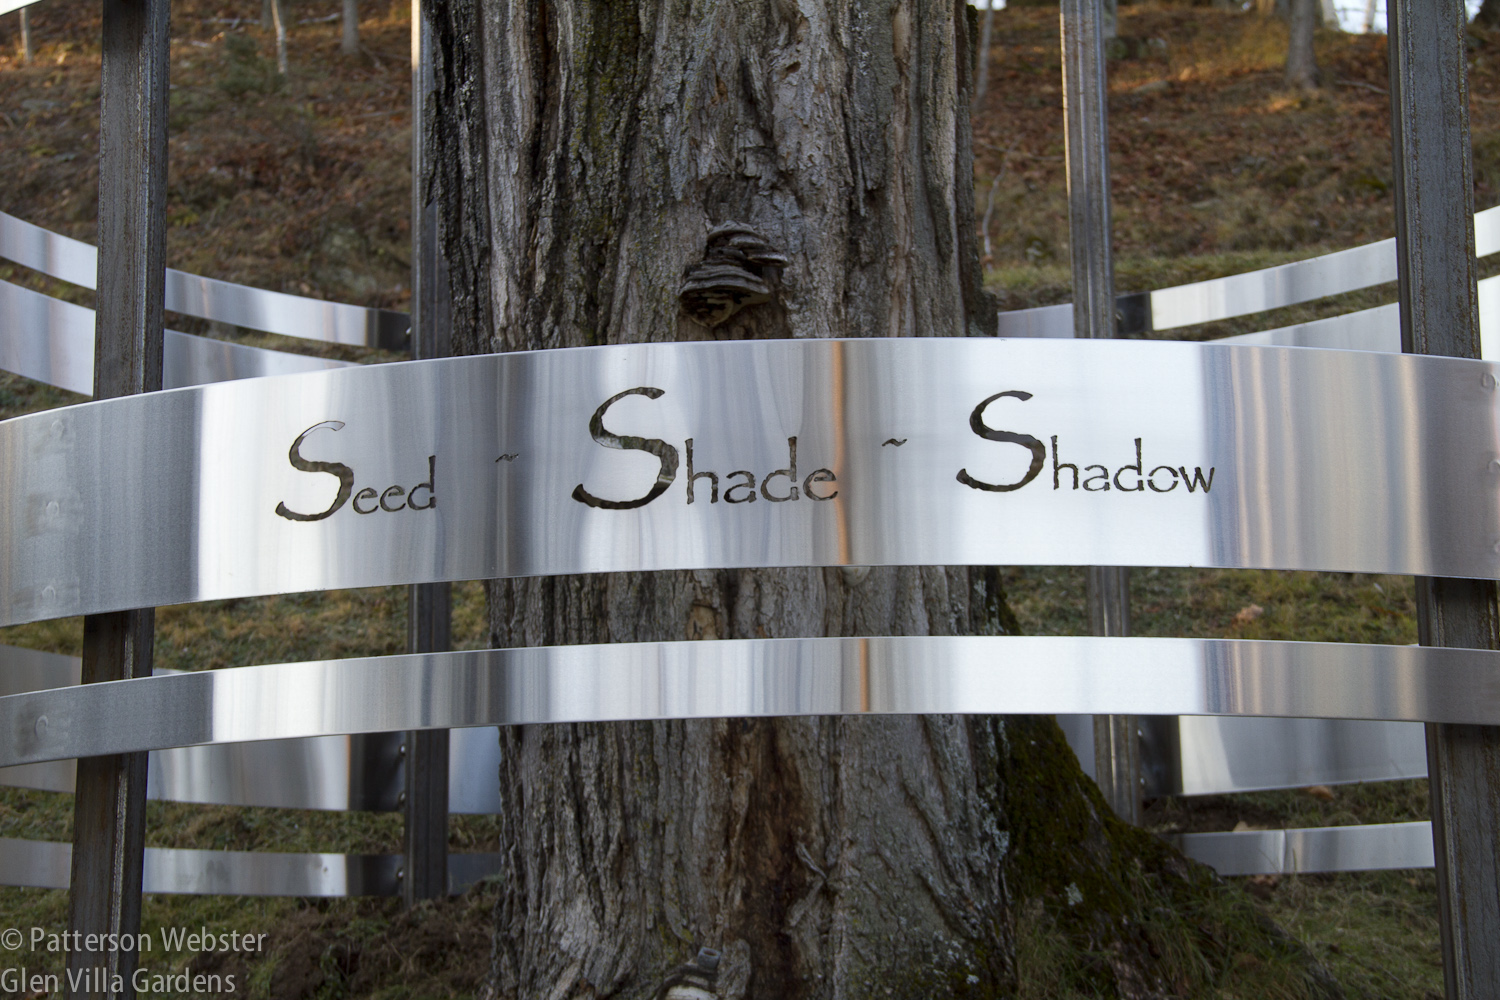 Seed Shade Shadow: the life of the tree compressed into three words.